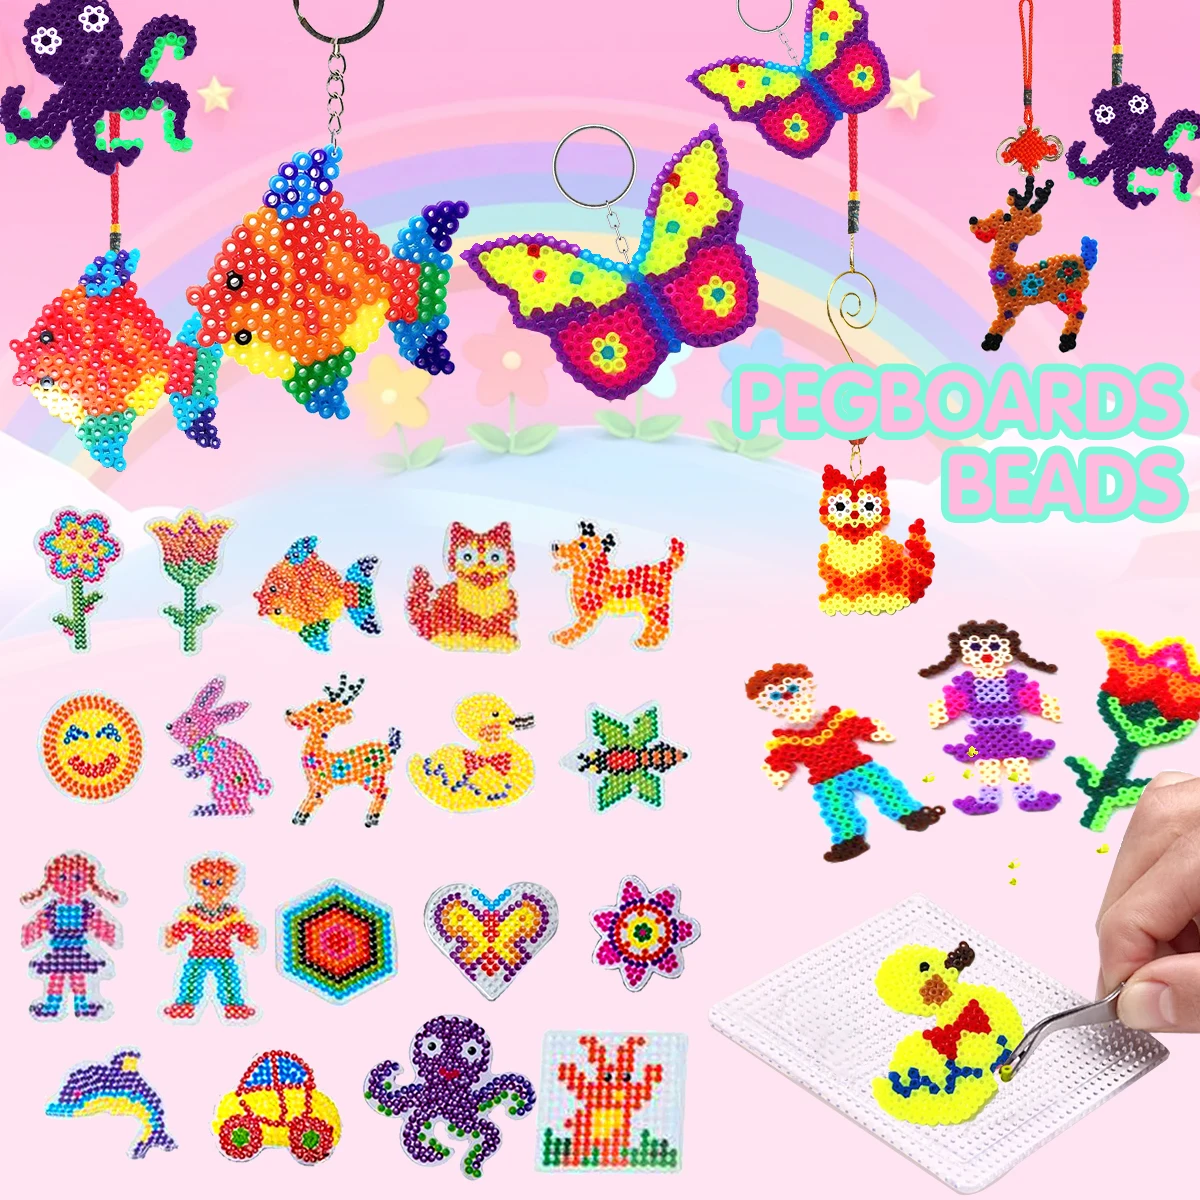 

5mm Fuse Beads Pegboards Animals Hama Perler Iron Beads Patterns Template with Colorful Card Kids DIY Craft Making Puzzle Toy